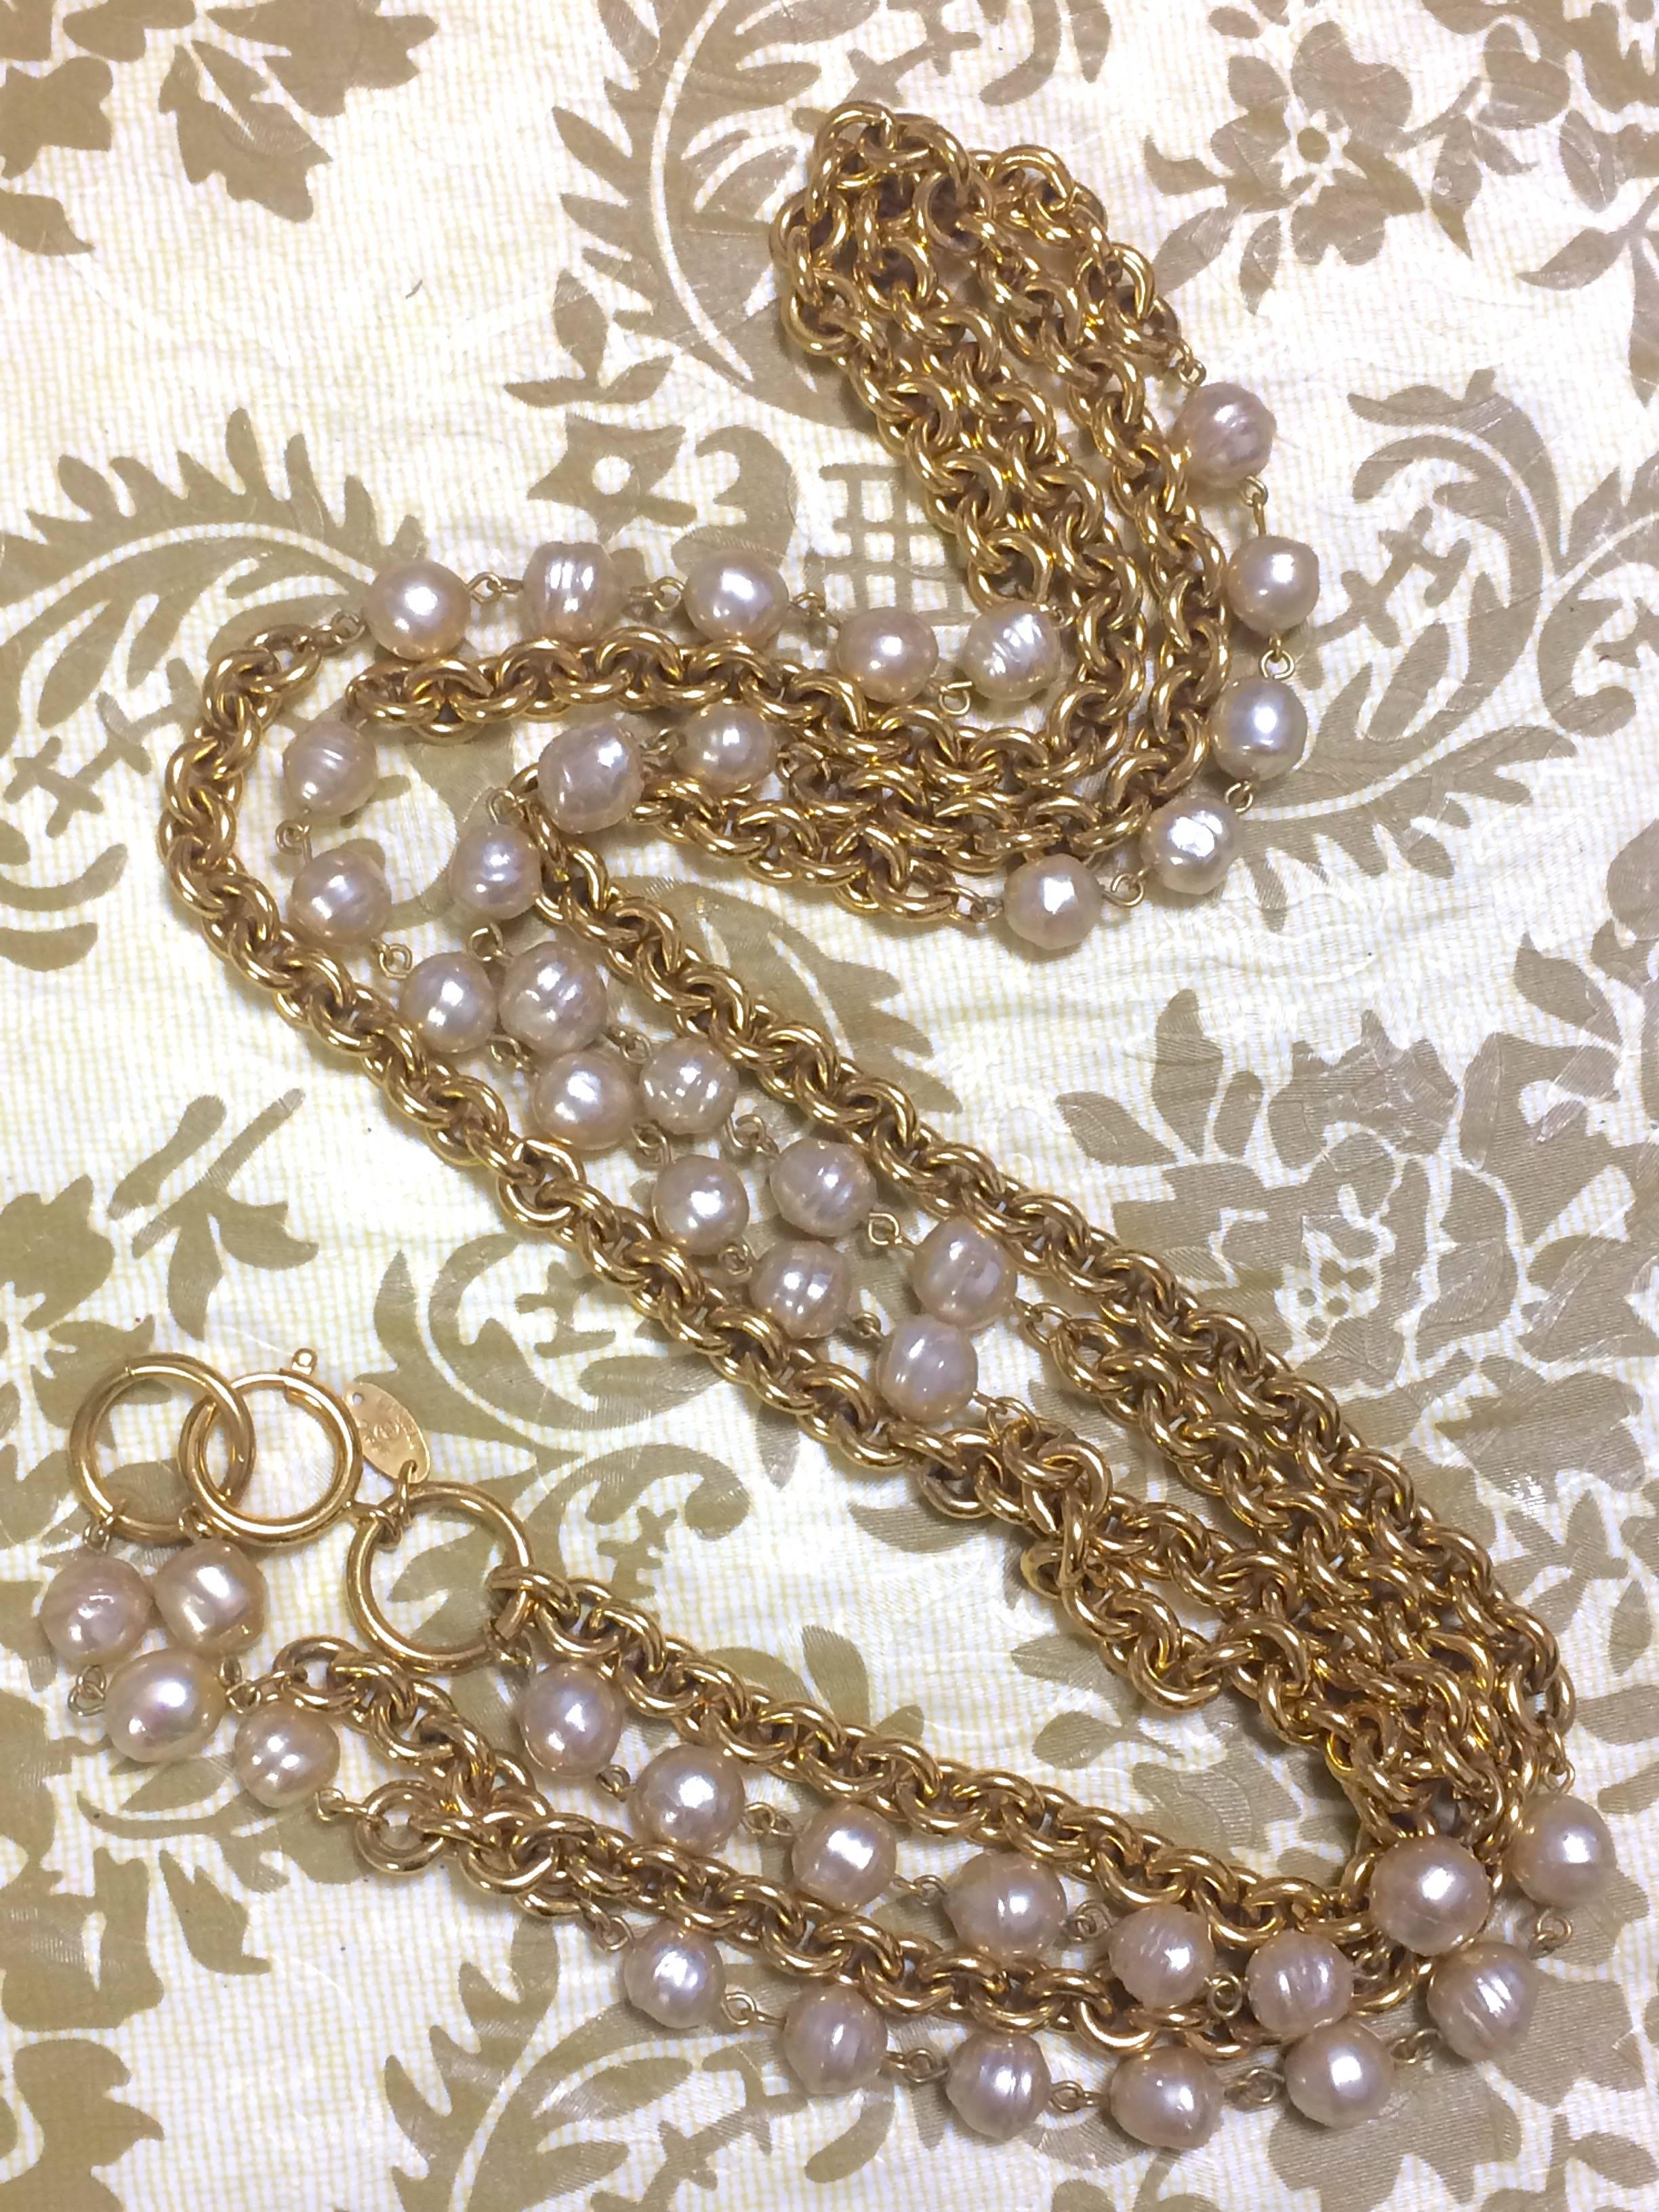  Vintage CHANEL double layer long chain necklace with baroque faux pearls. 4